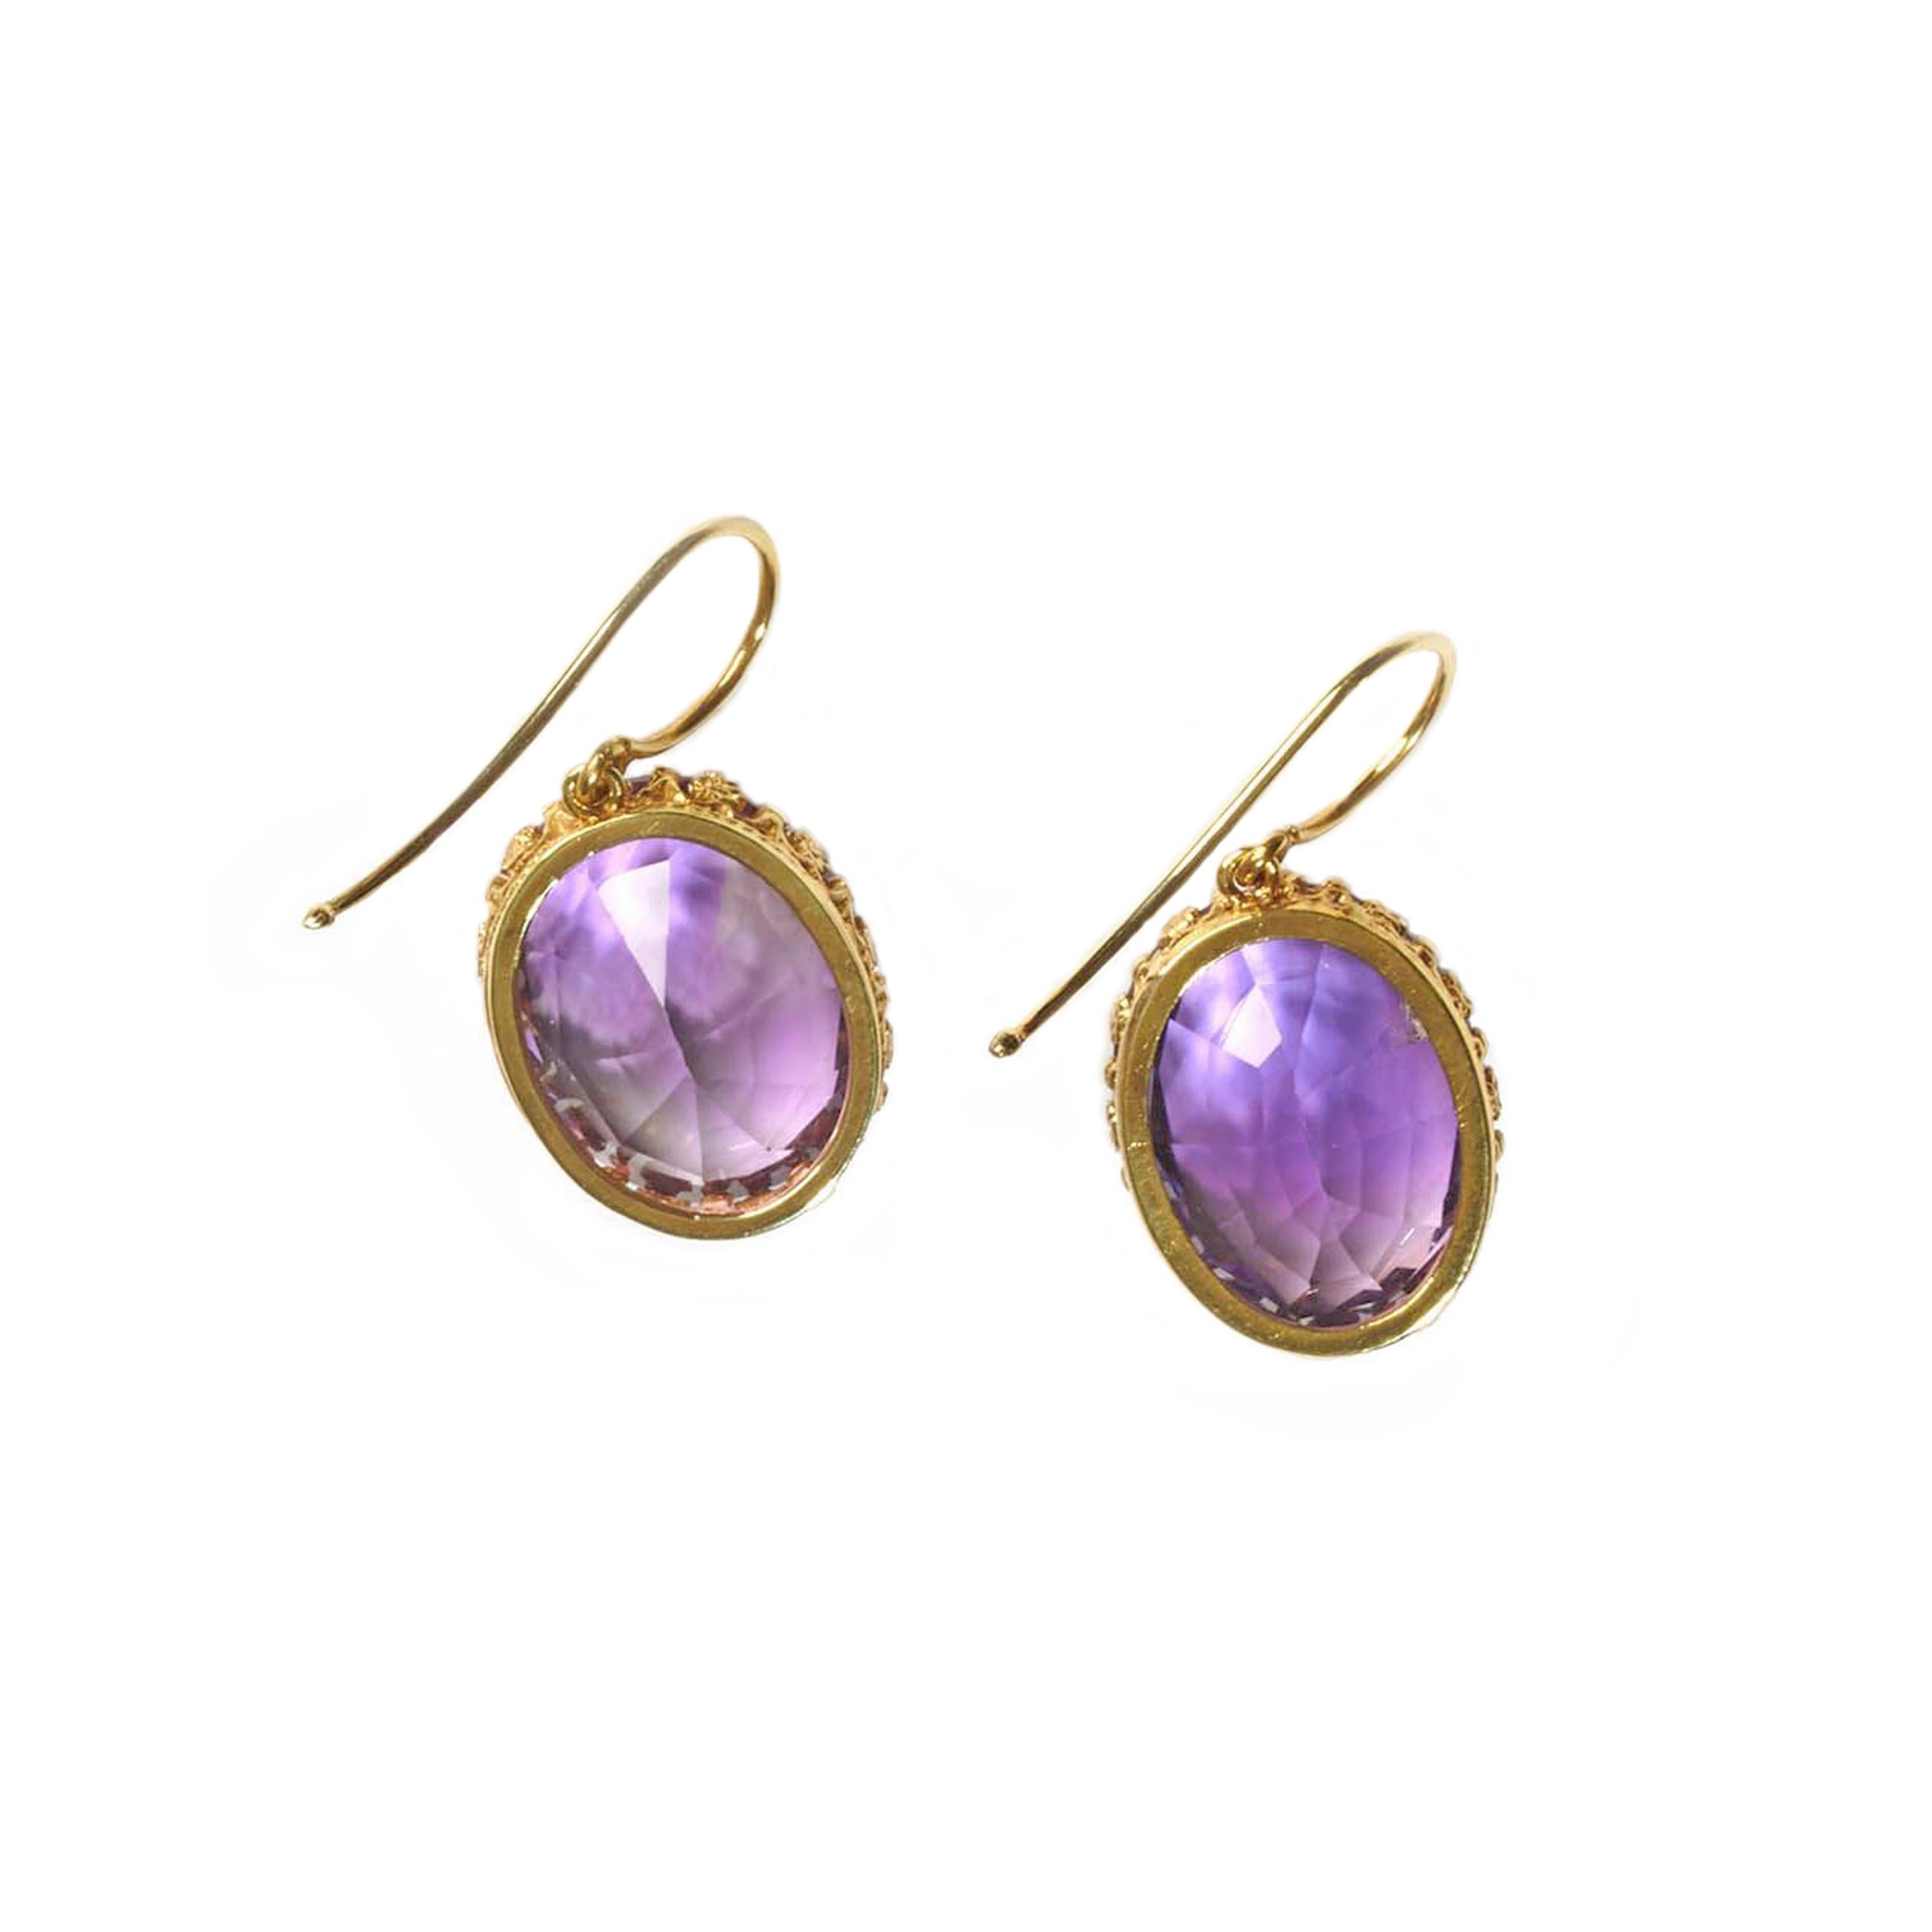 Oval Cut Antique Amethyst and Gold Drop Earrings, 33.88 Carats, circa 1880